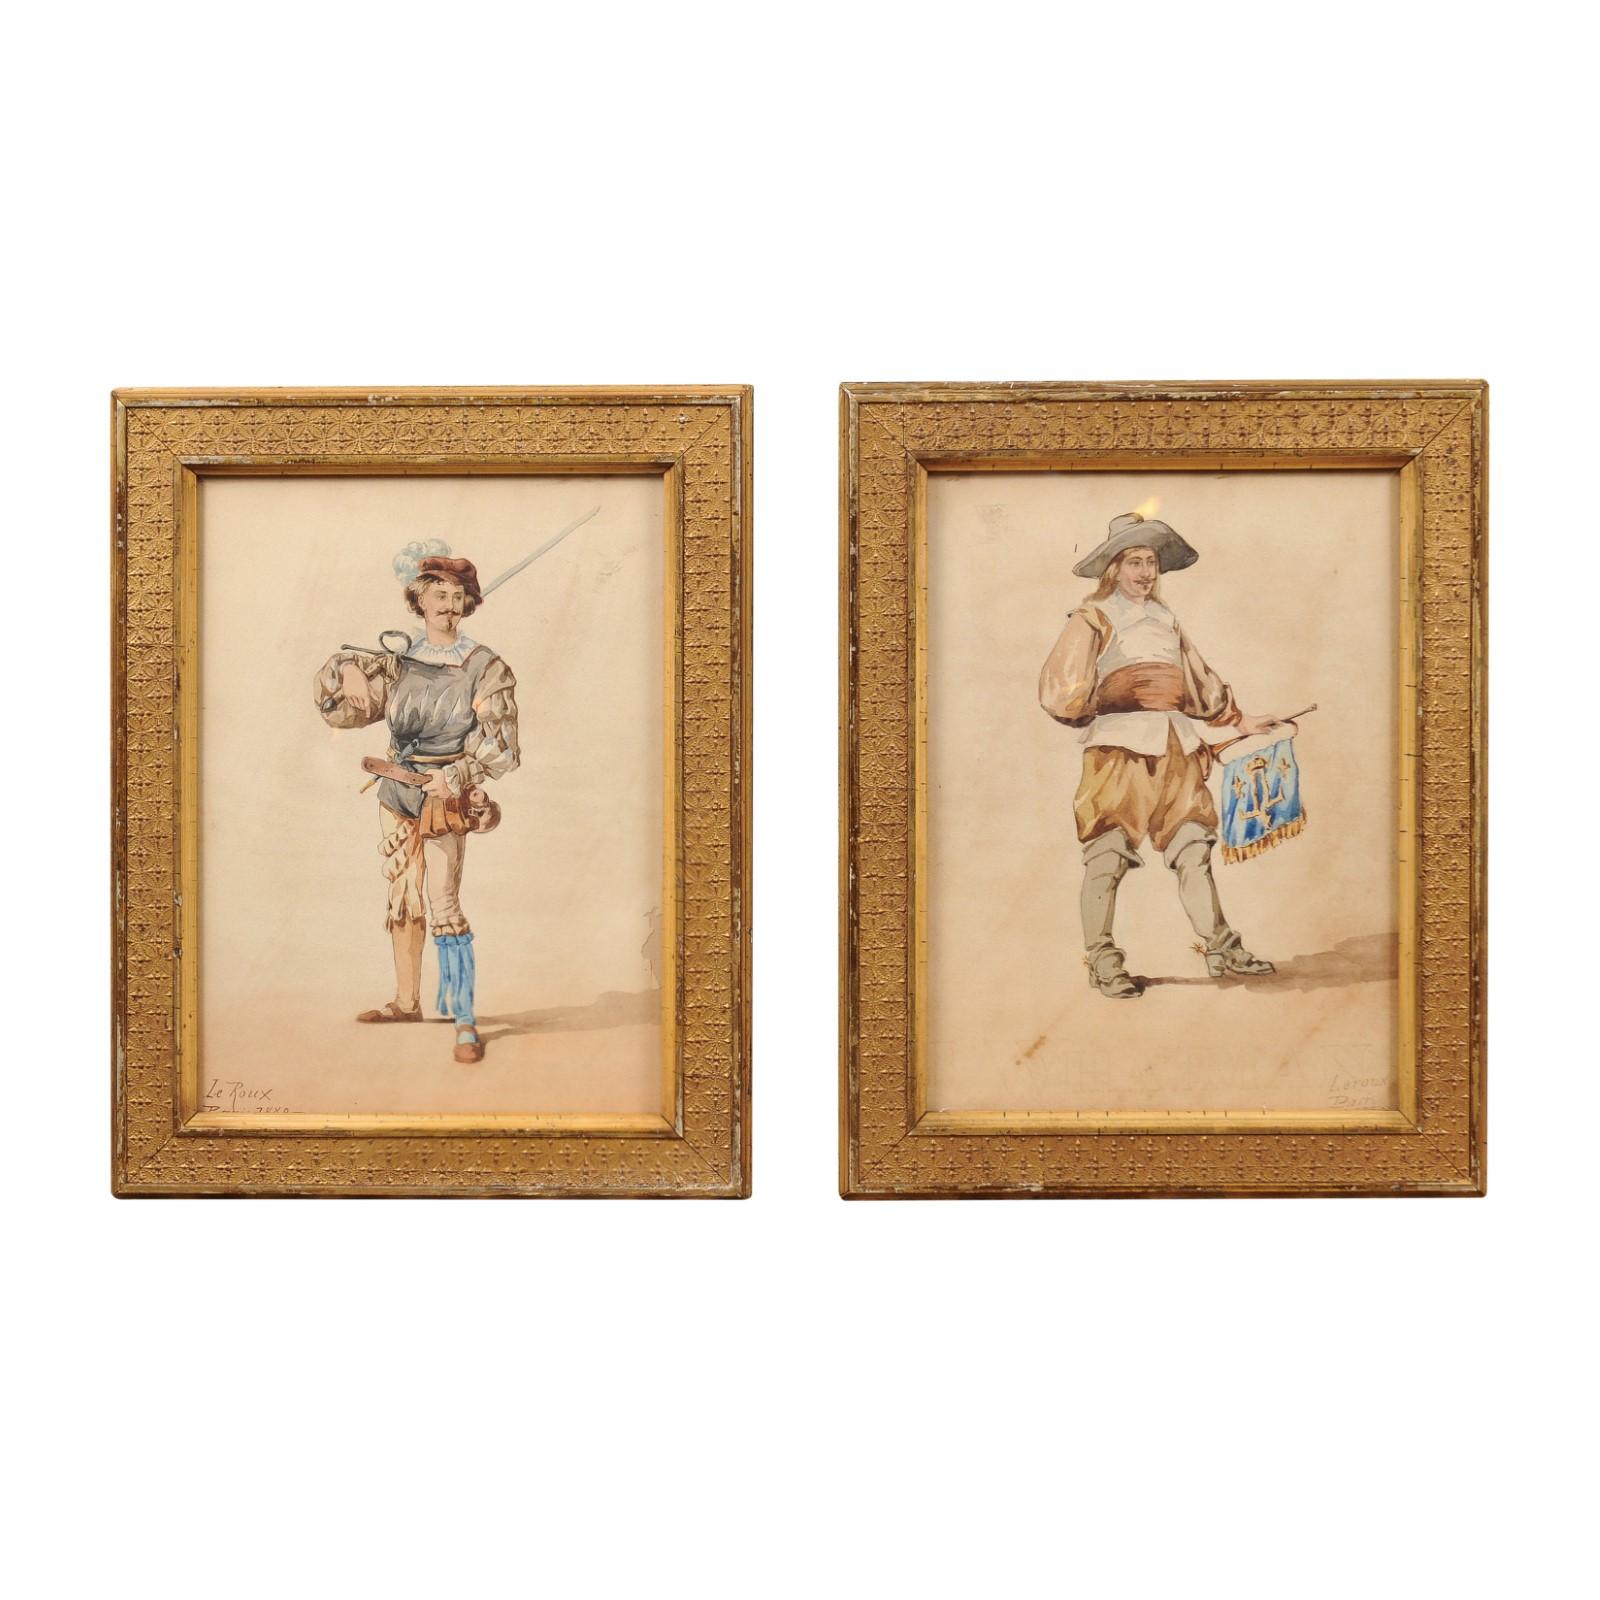 Pair of 19th Century French Giltwood Framed Watercolor Paintings on Men